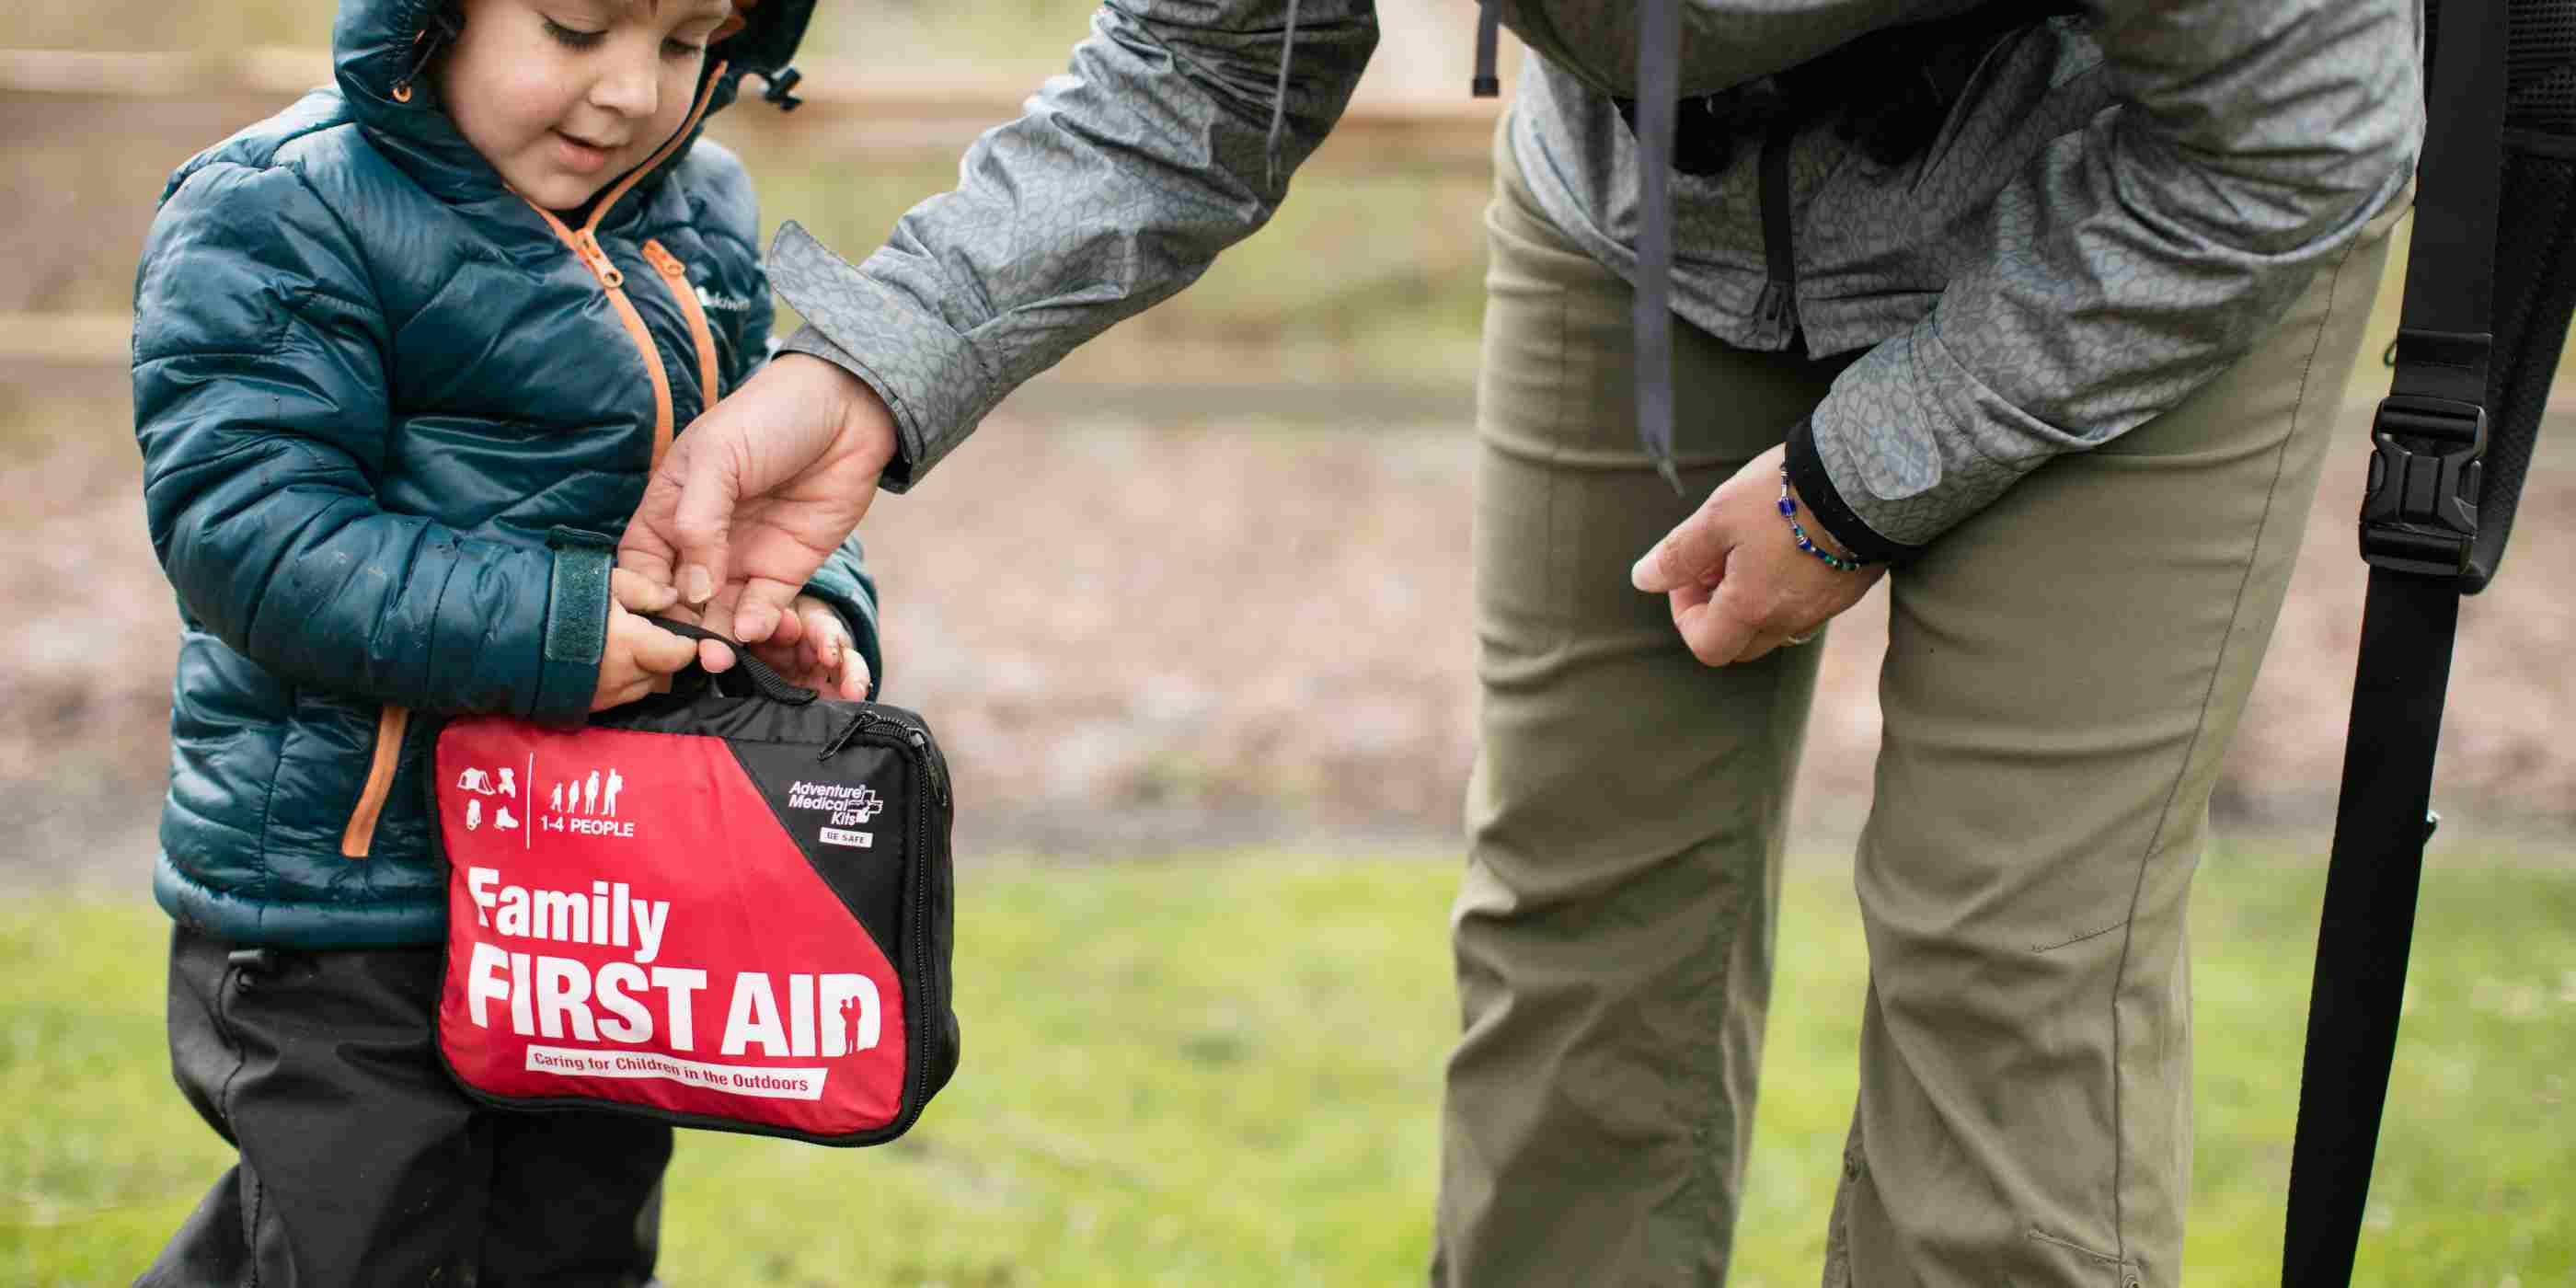 Adventure First Aid, Family First Aid Kit person and child holding kit outside